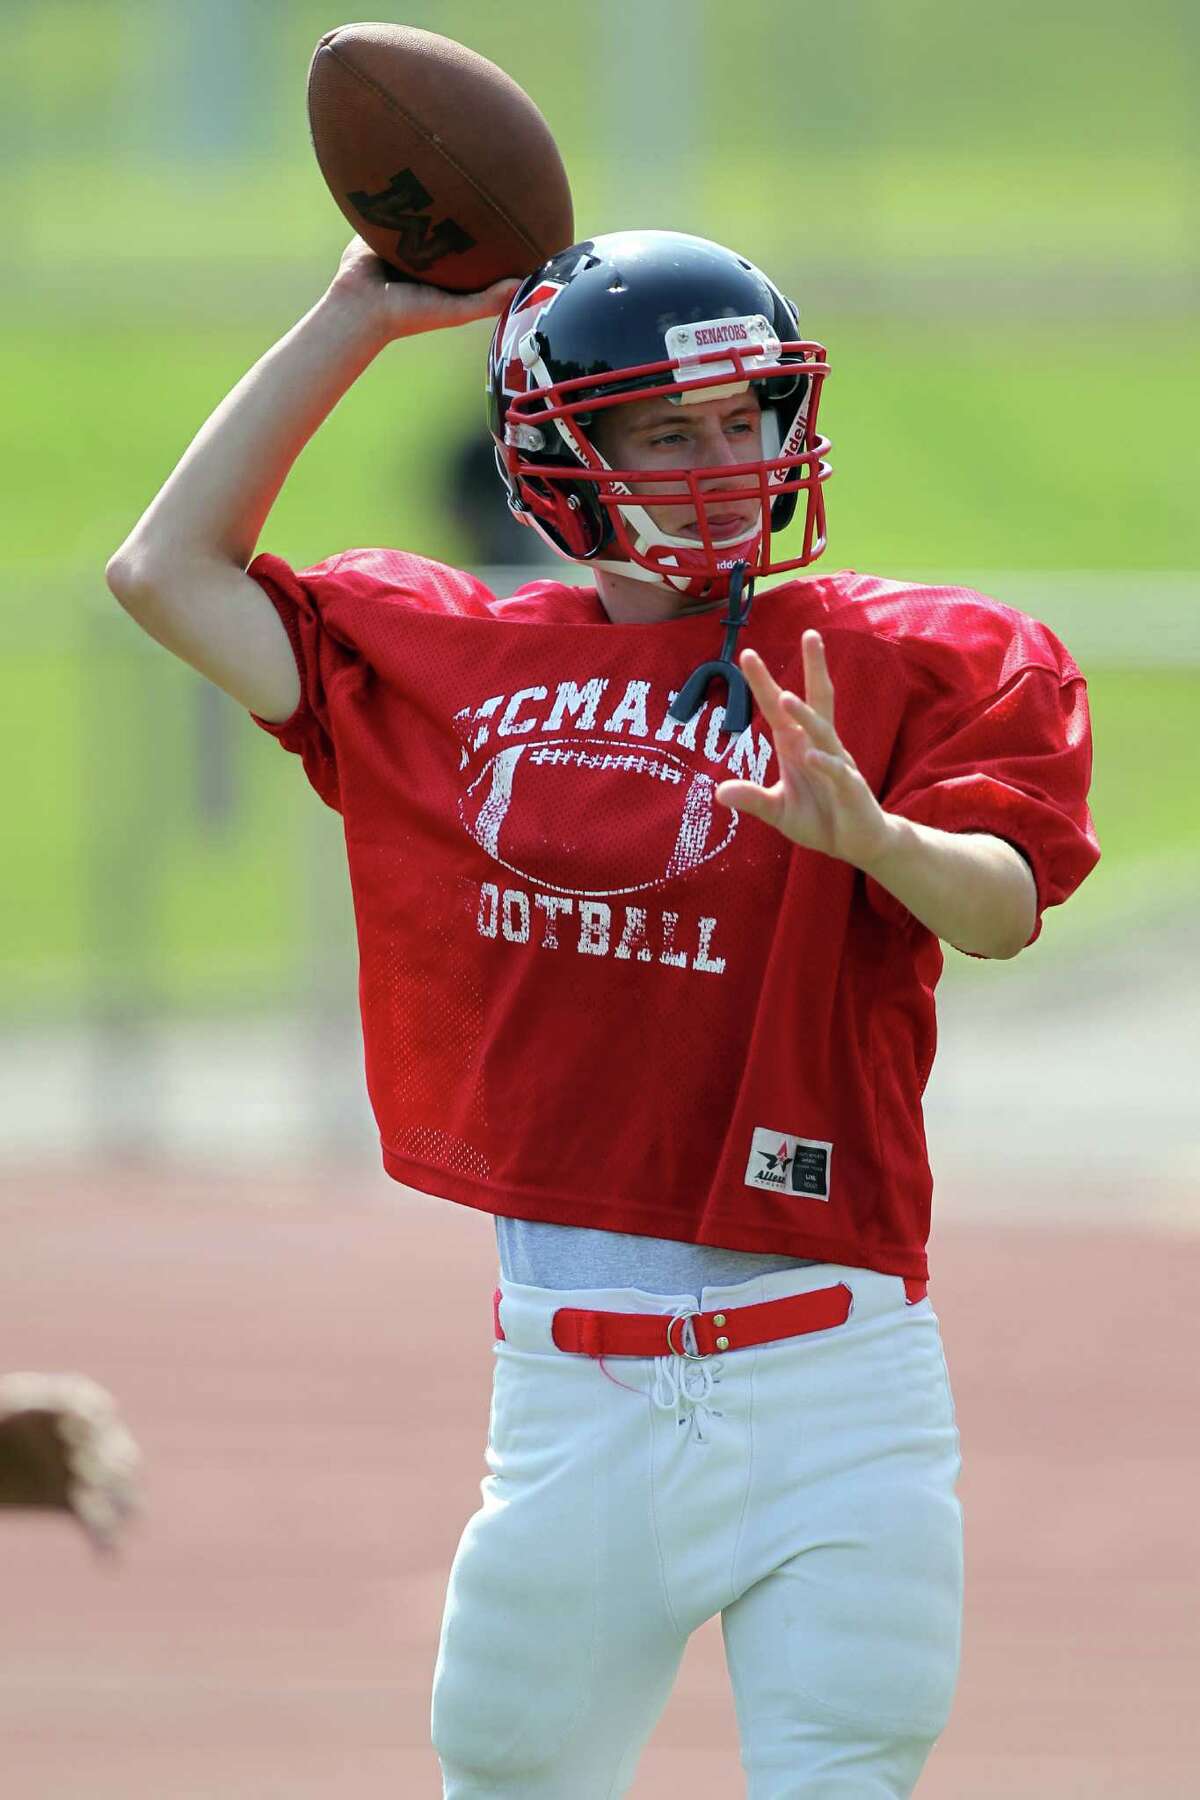 Brien McMahon quarterback Matt Downey tosses the football during practice on earlier this season. He tossed two touchdown passes in the team's victory over Fairfield Ludlowe last Friday.